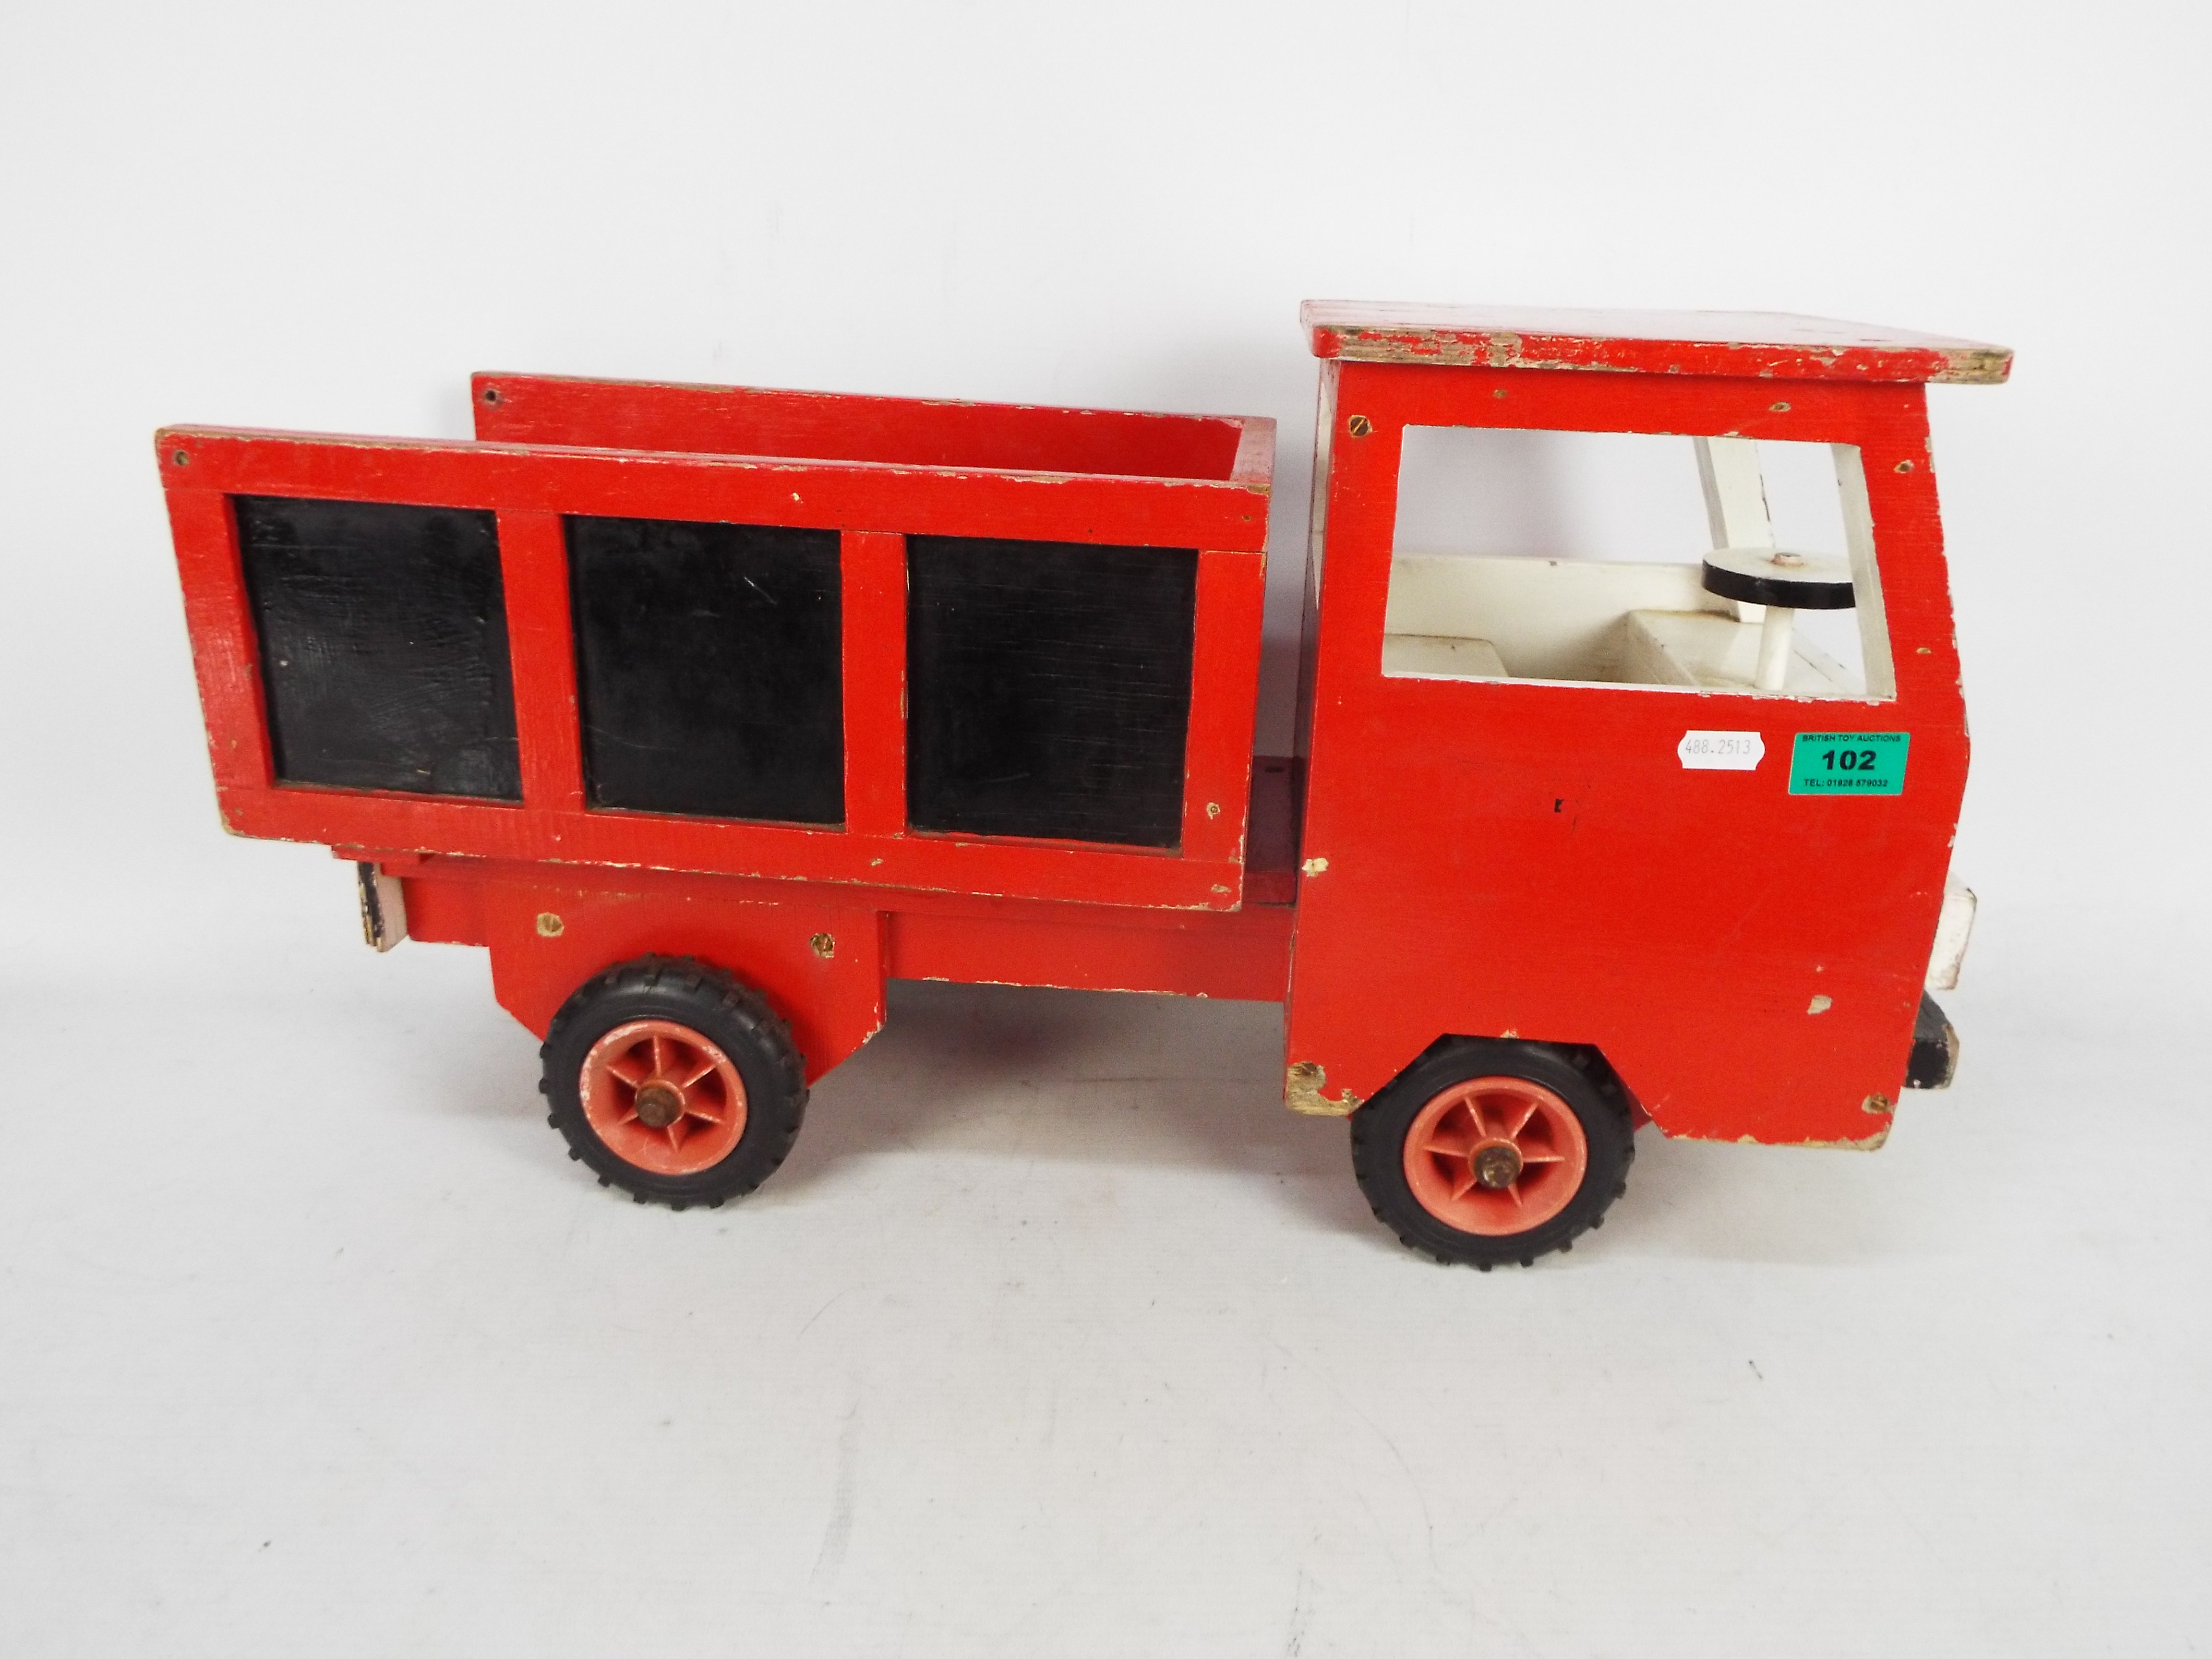 A vintage hand-made wooden tipper truck painted red with black panels and white driver's cab, - Image 2 of 5